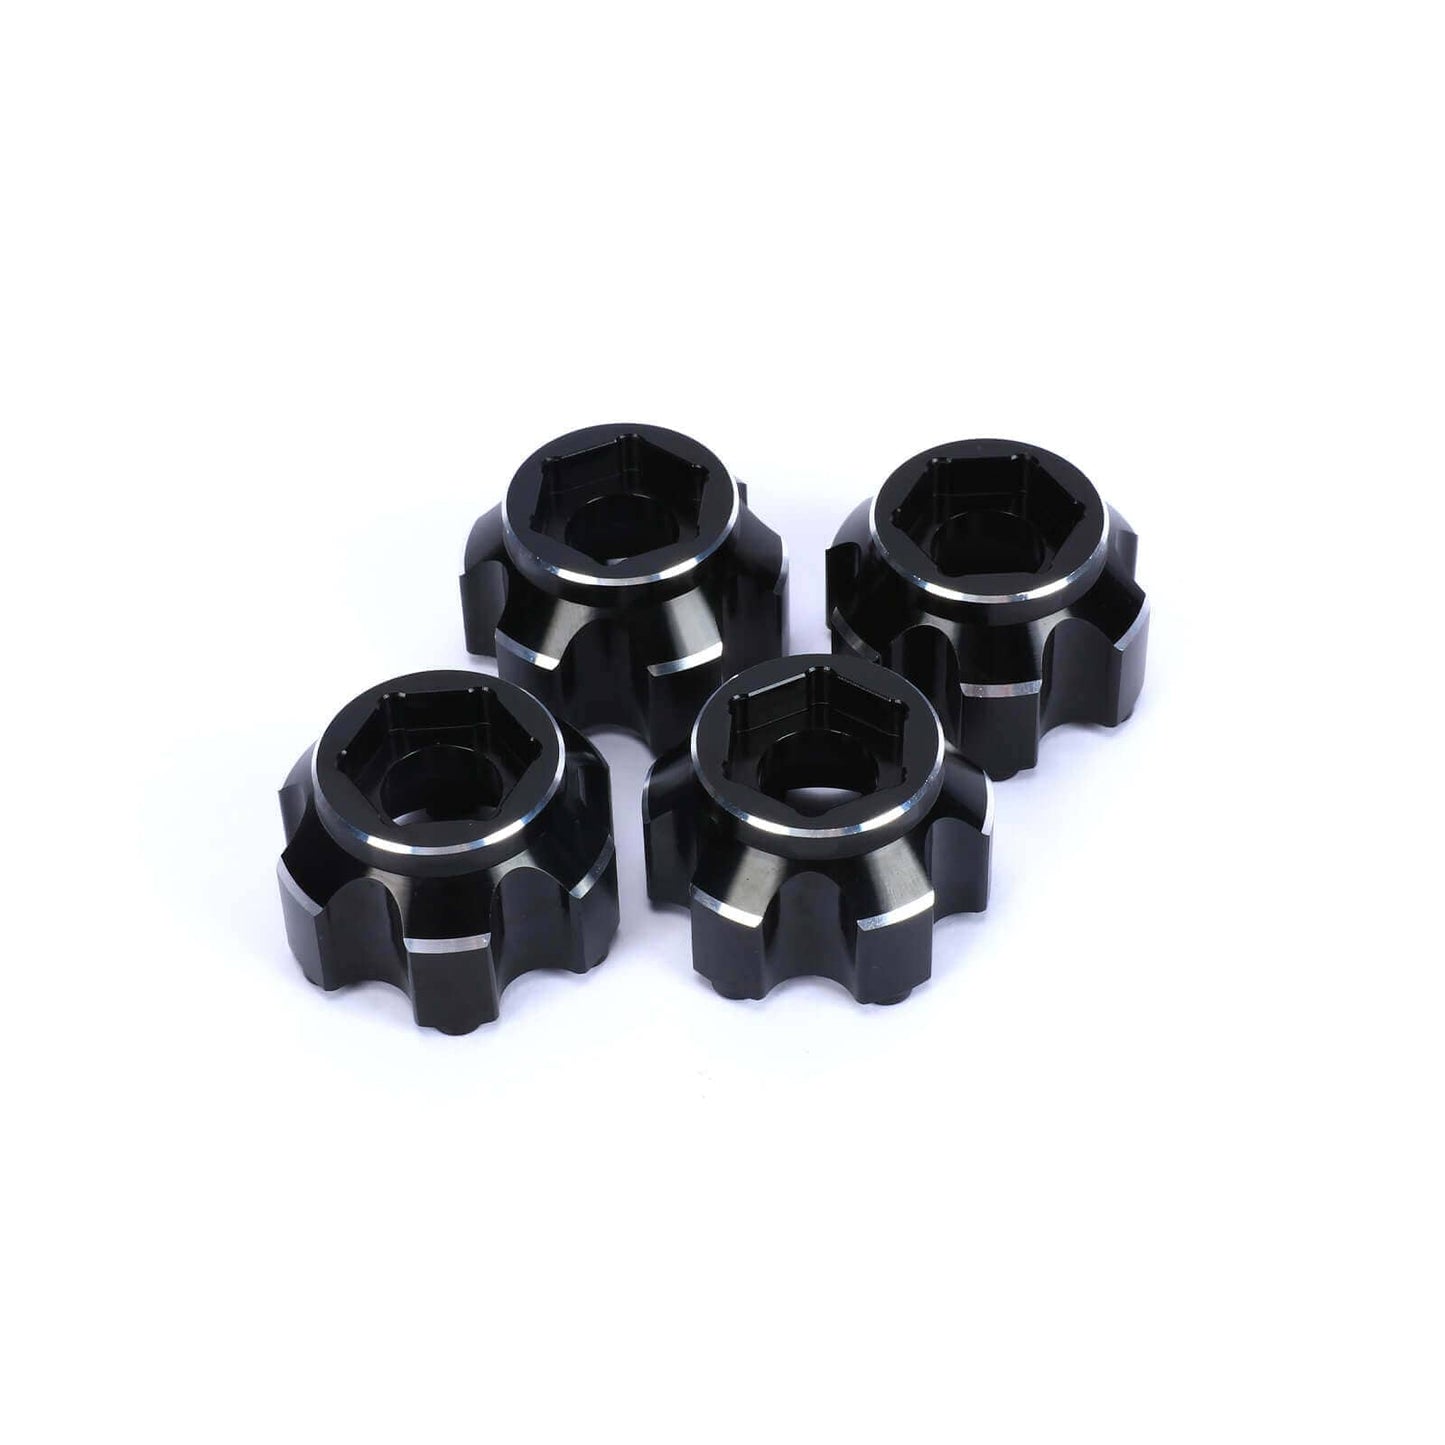 RCAWD UNIHEX UNIHEX 1/10 6x30 to 17mm Aluminum Hex Adapters for Pro-line 6x30 Removable Hex Wheels Black